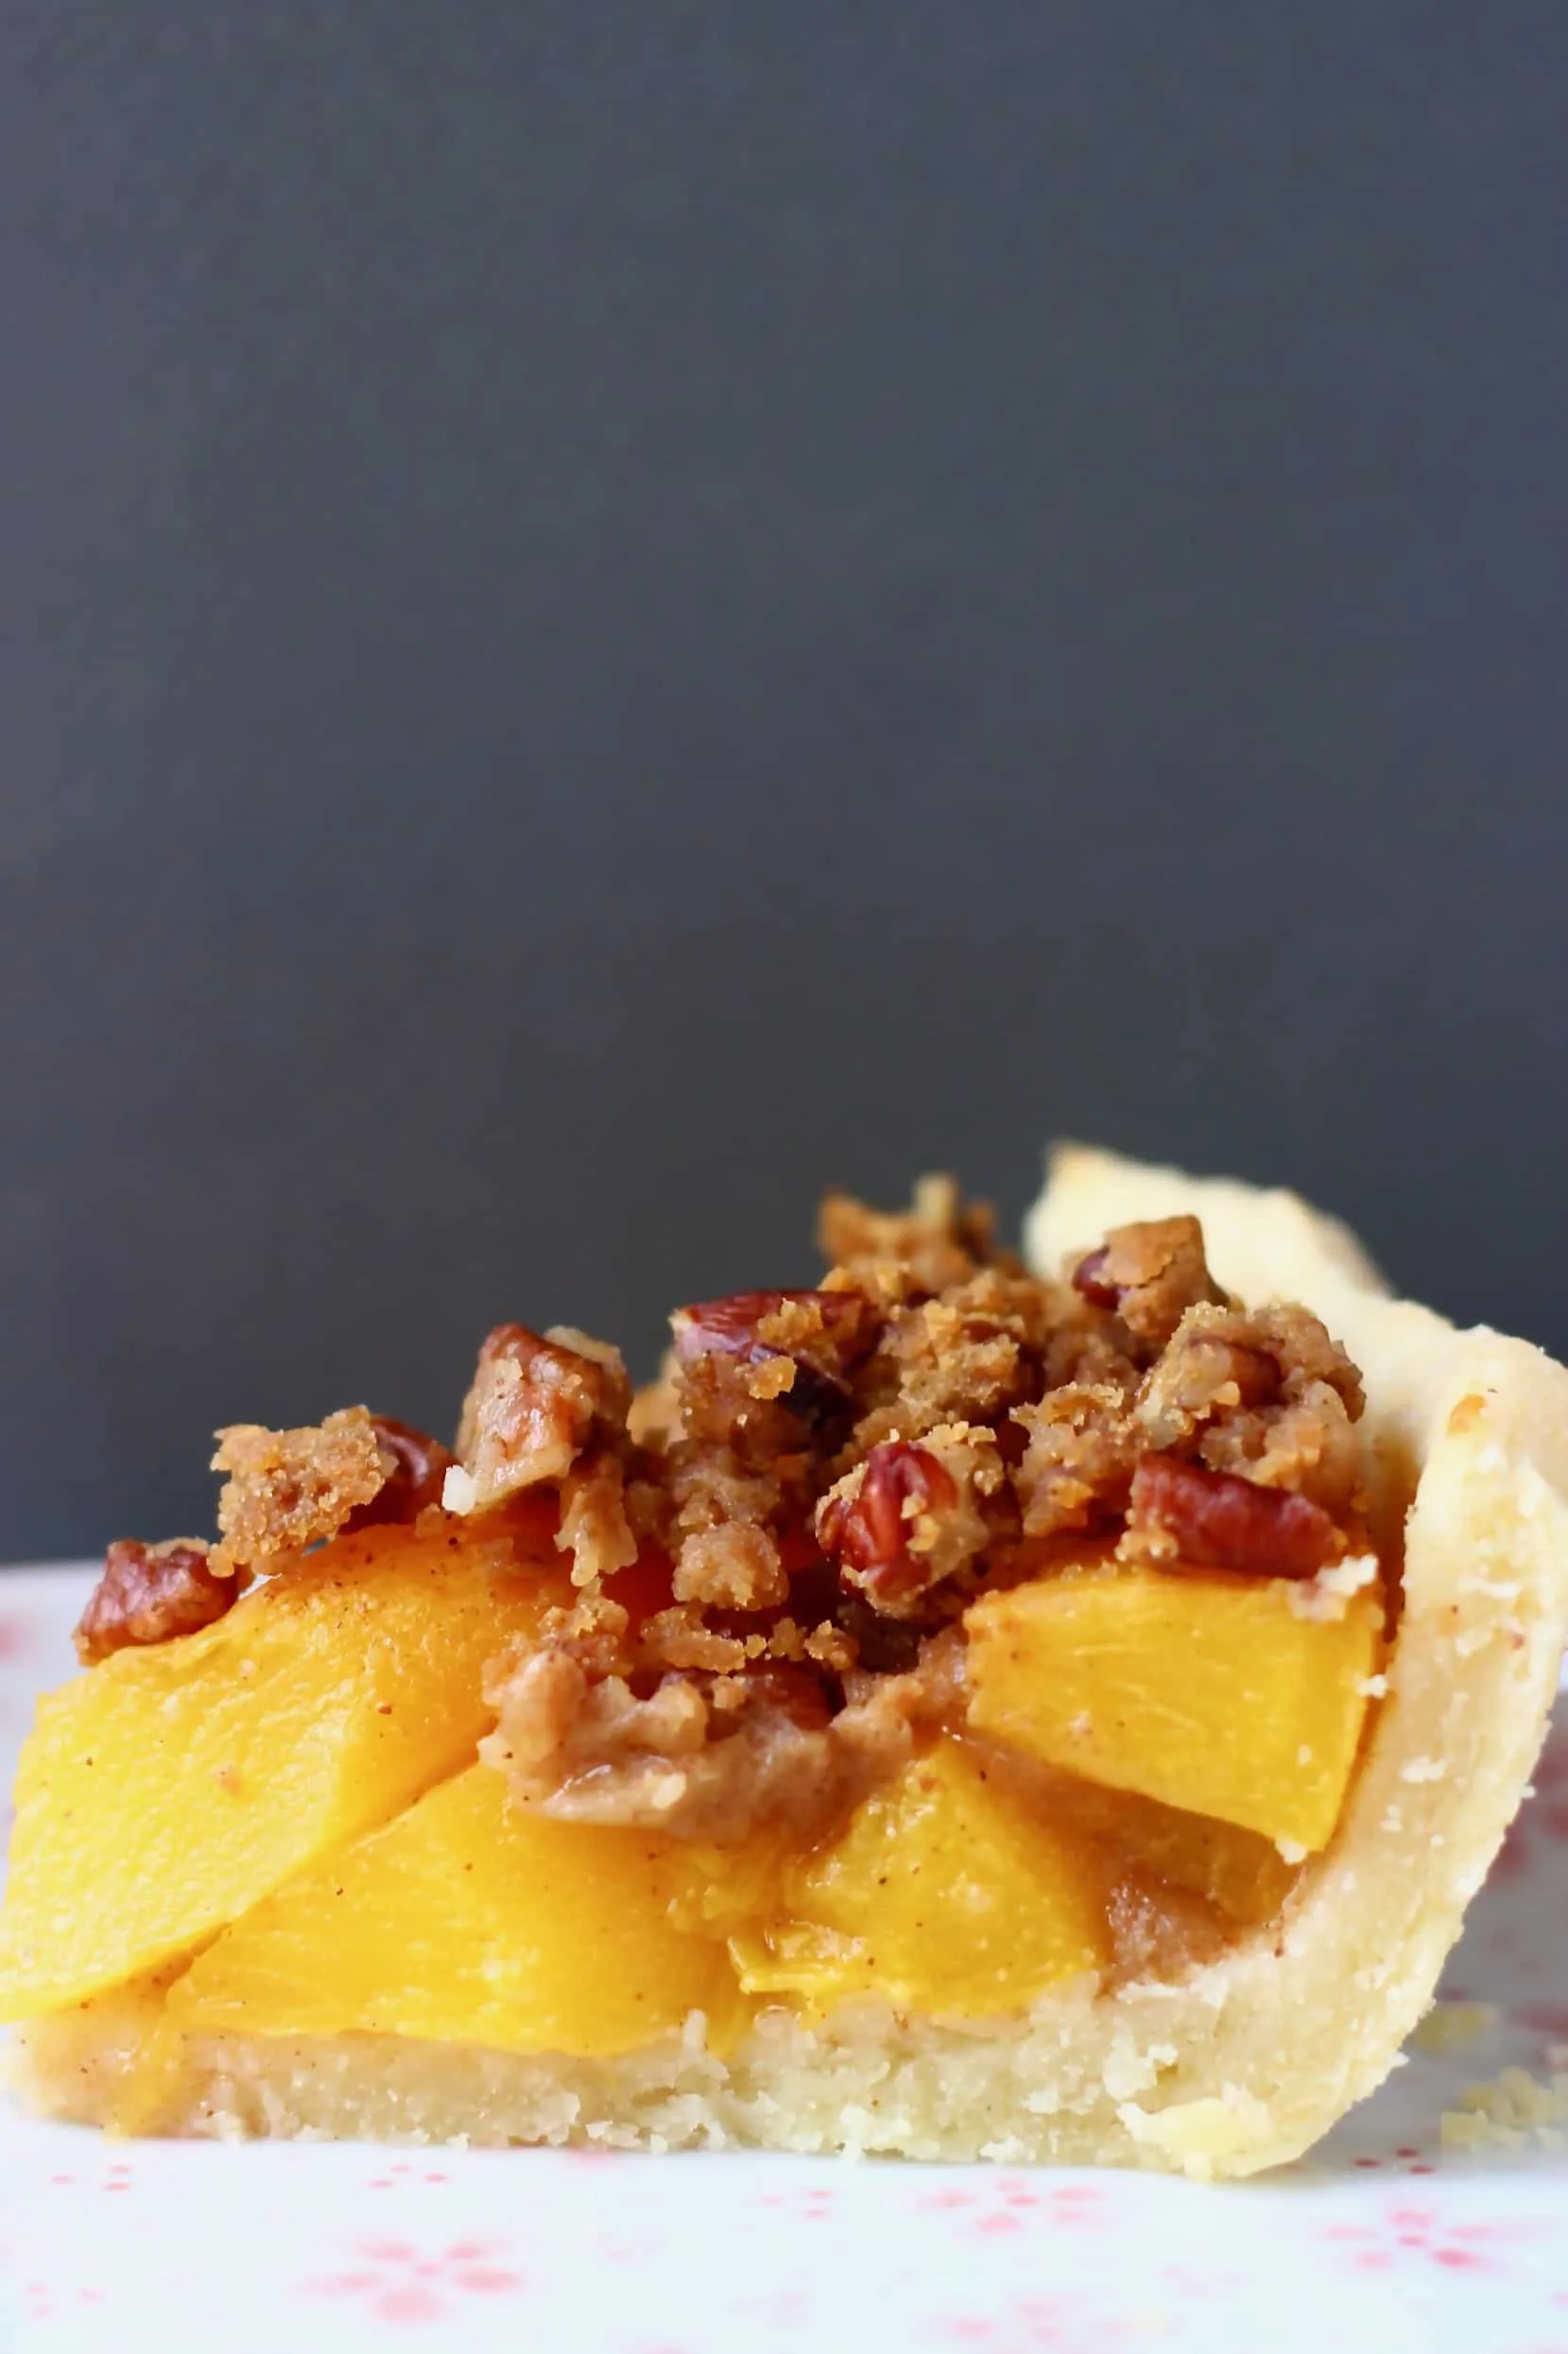 A slice of gluten-free vegan peach pie on a white plate with a gold fork and a grey background